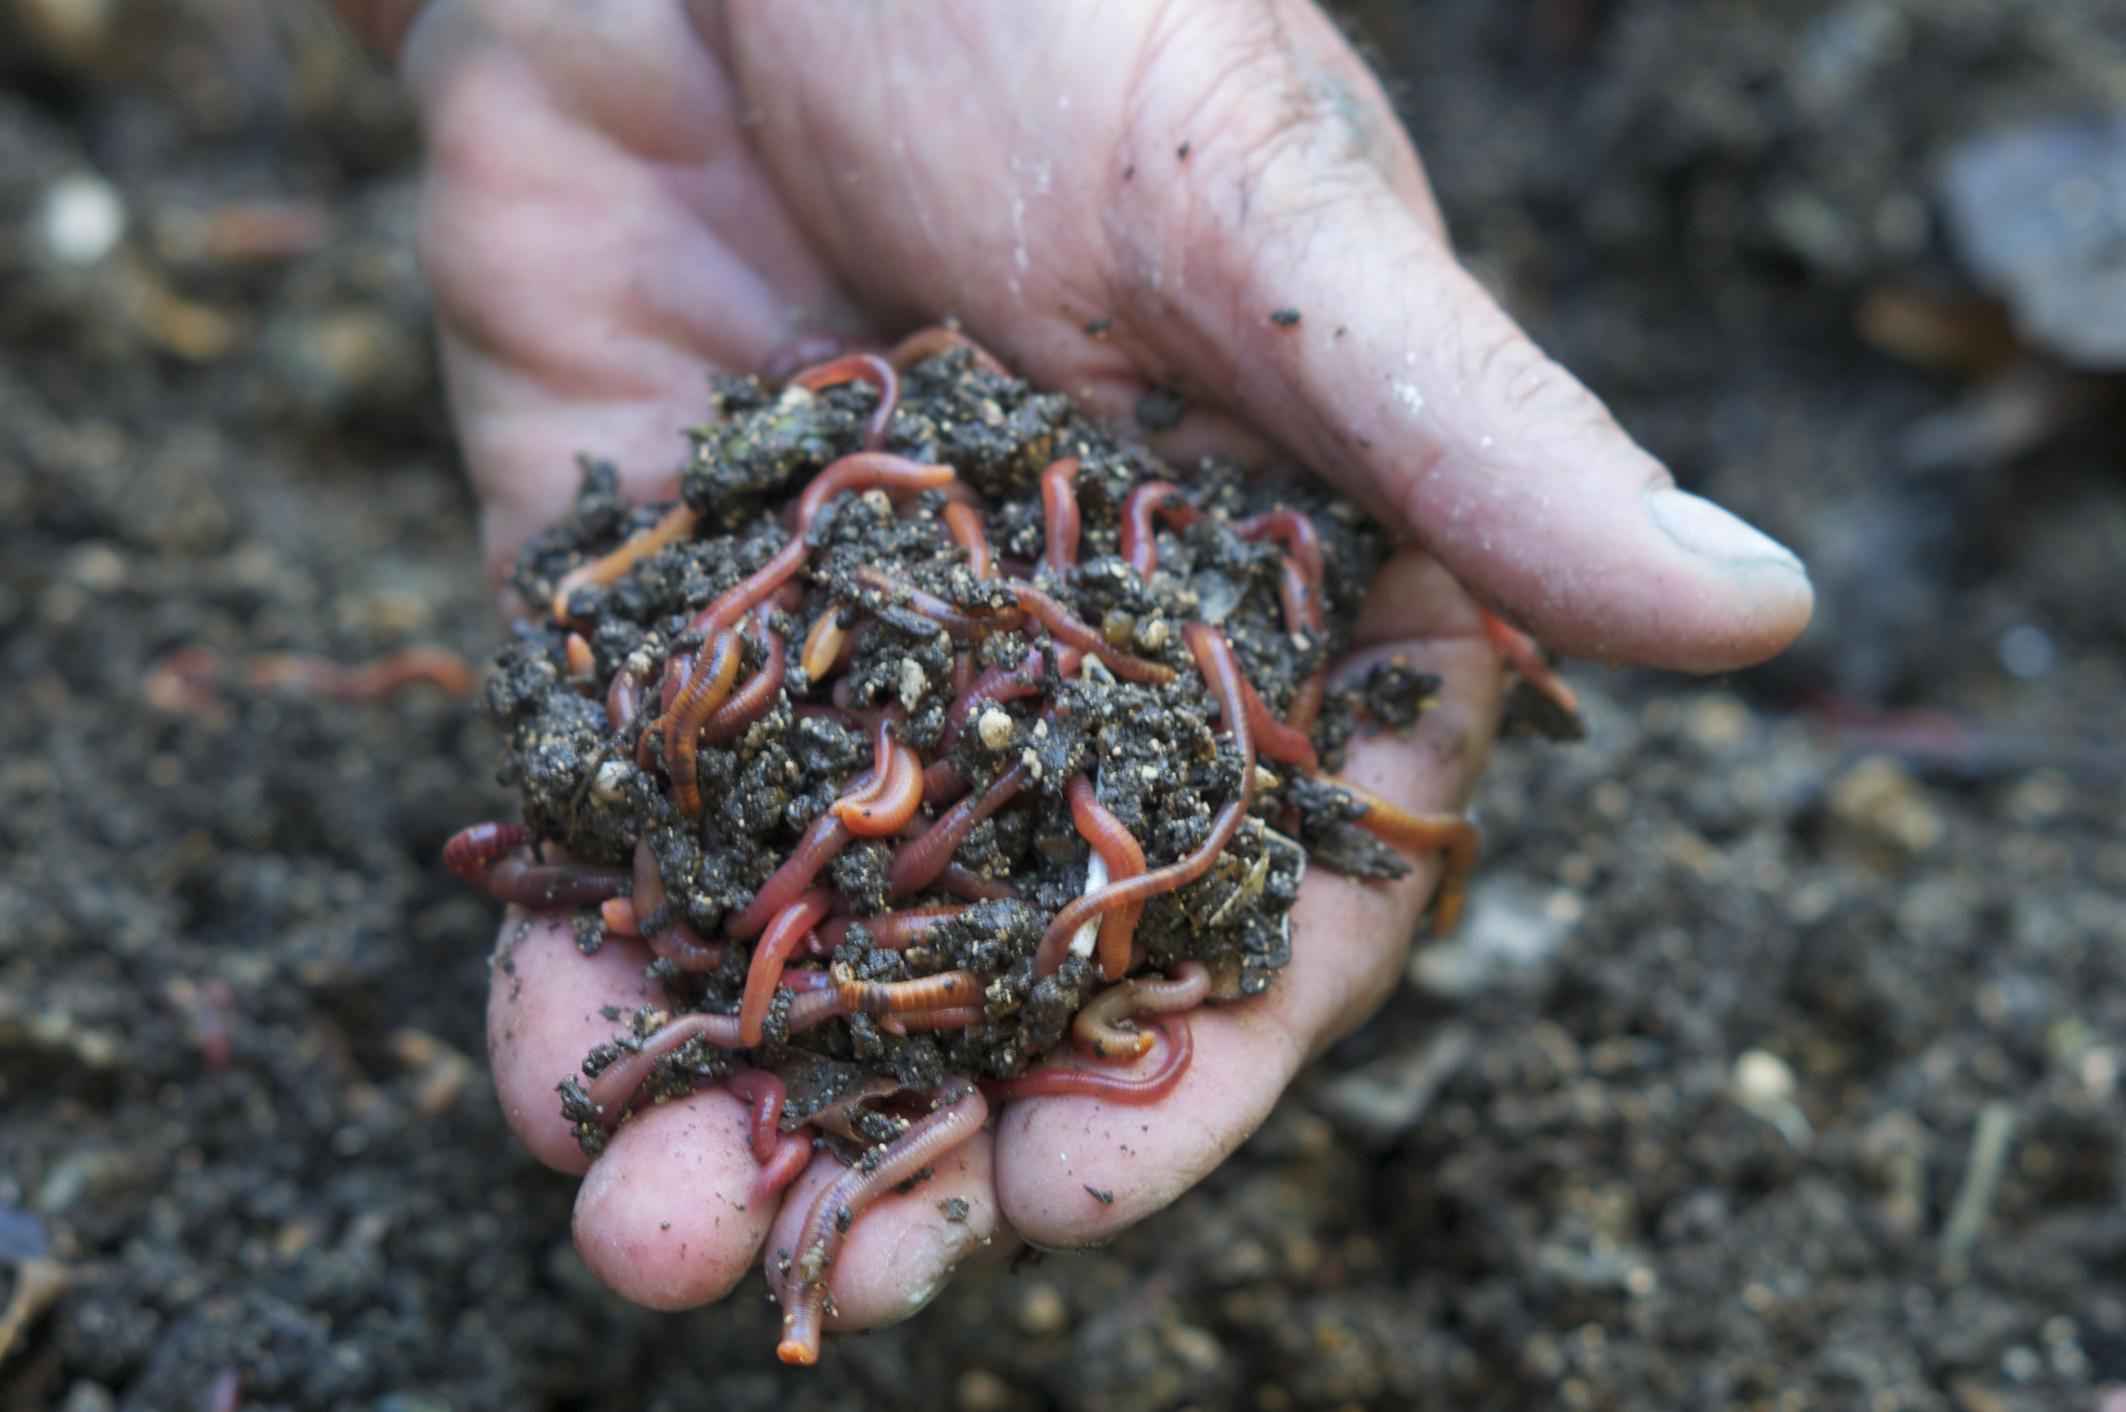 download best worms for composting